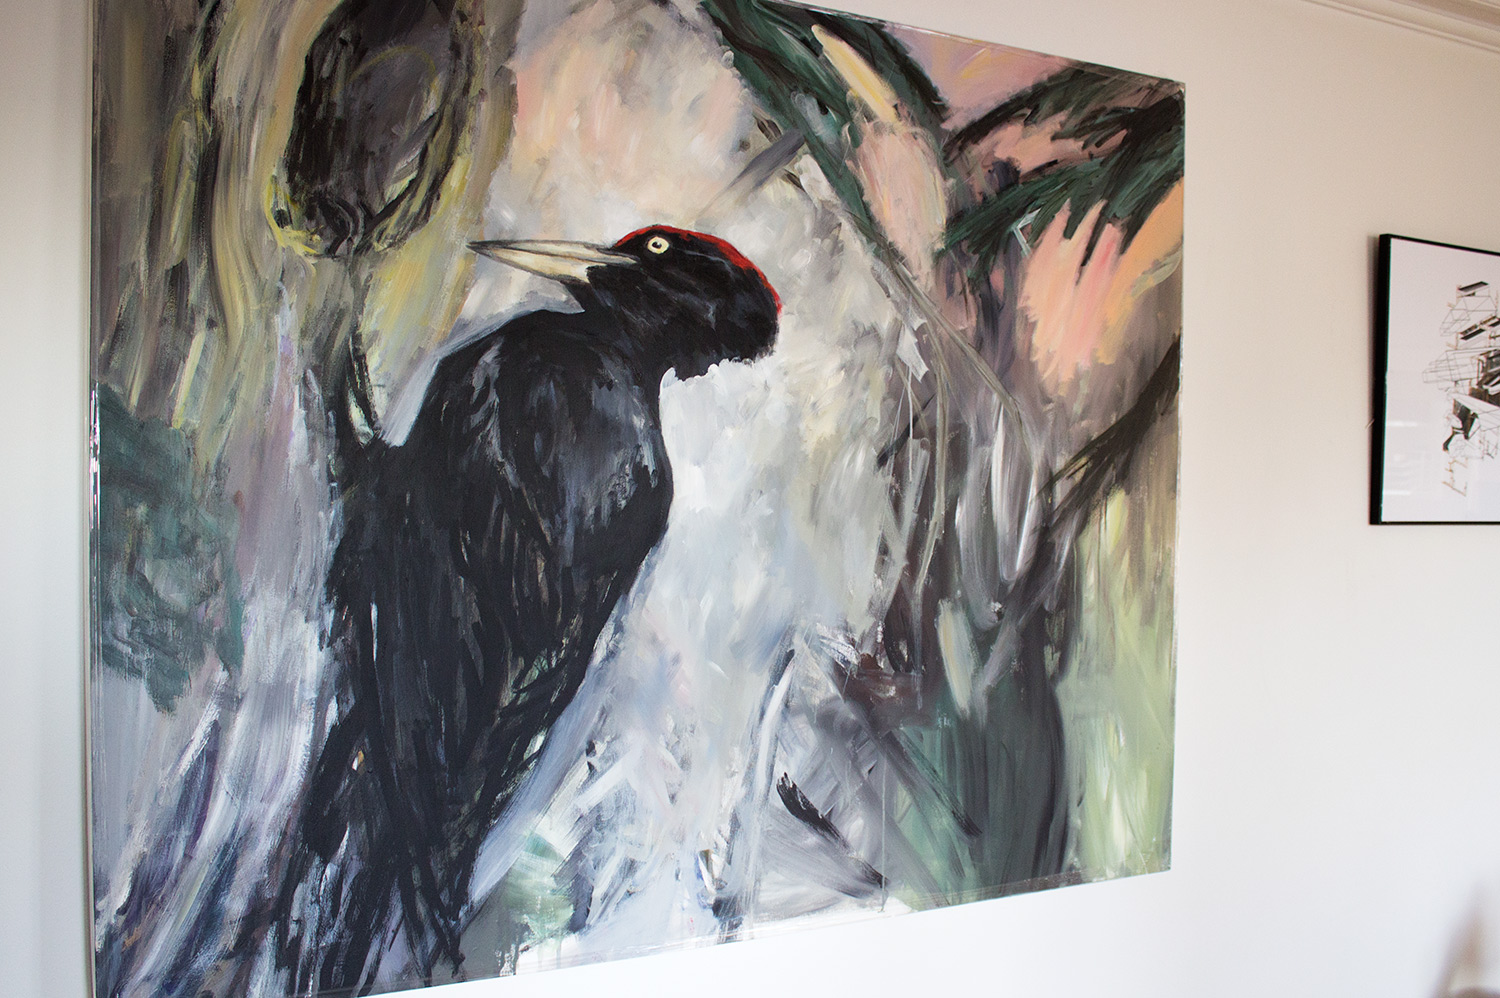 paintings, aesthetic, animal, figurative, landscape, animals, botany, nature, wildlife, black, green, grey, pink, cotton-canvas, oil, birds, contemporary-art, danish, decorative, design, flowers, interior, interior-design, modern, modern-art, natural, naturalism, nordic, plants, scandinavien, Buy original high quality art. Paintings, drawings, limited edition prints & posters by talented artists.